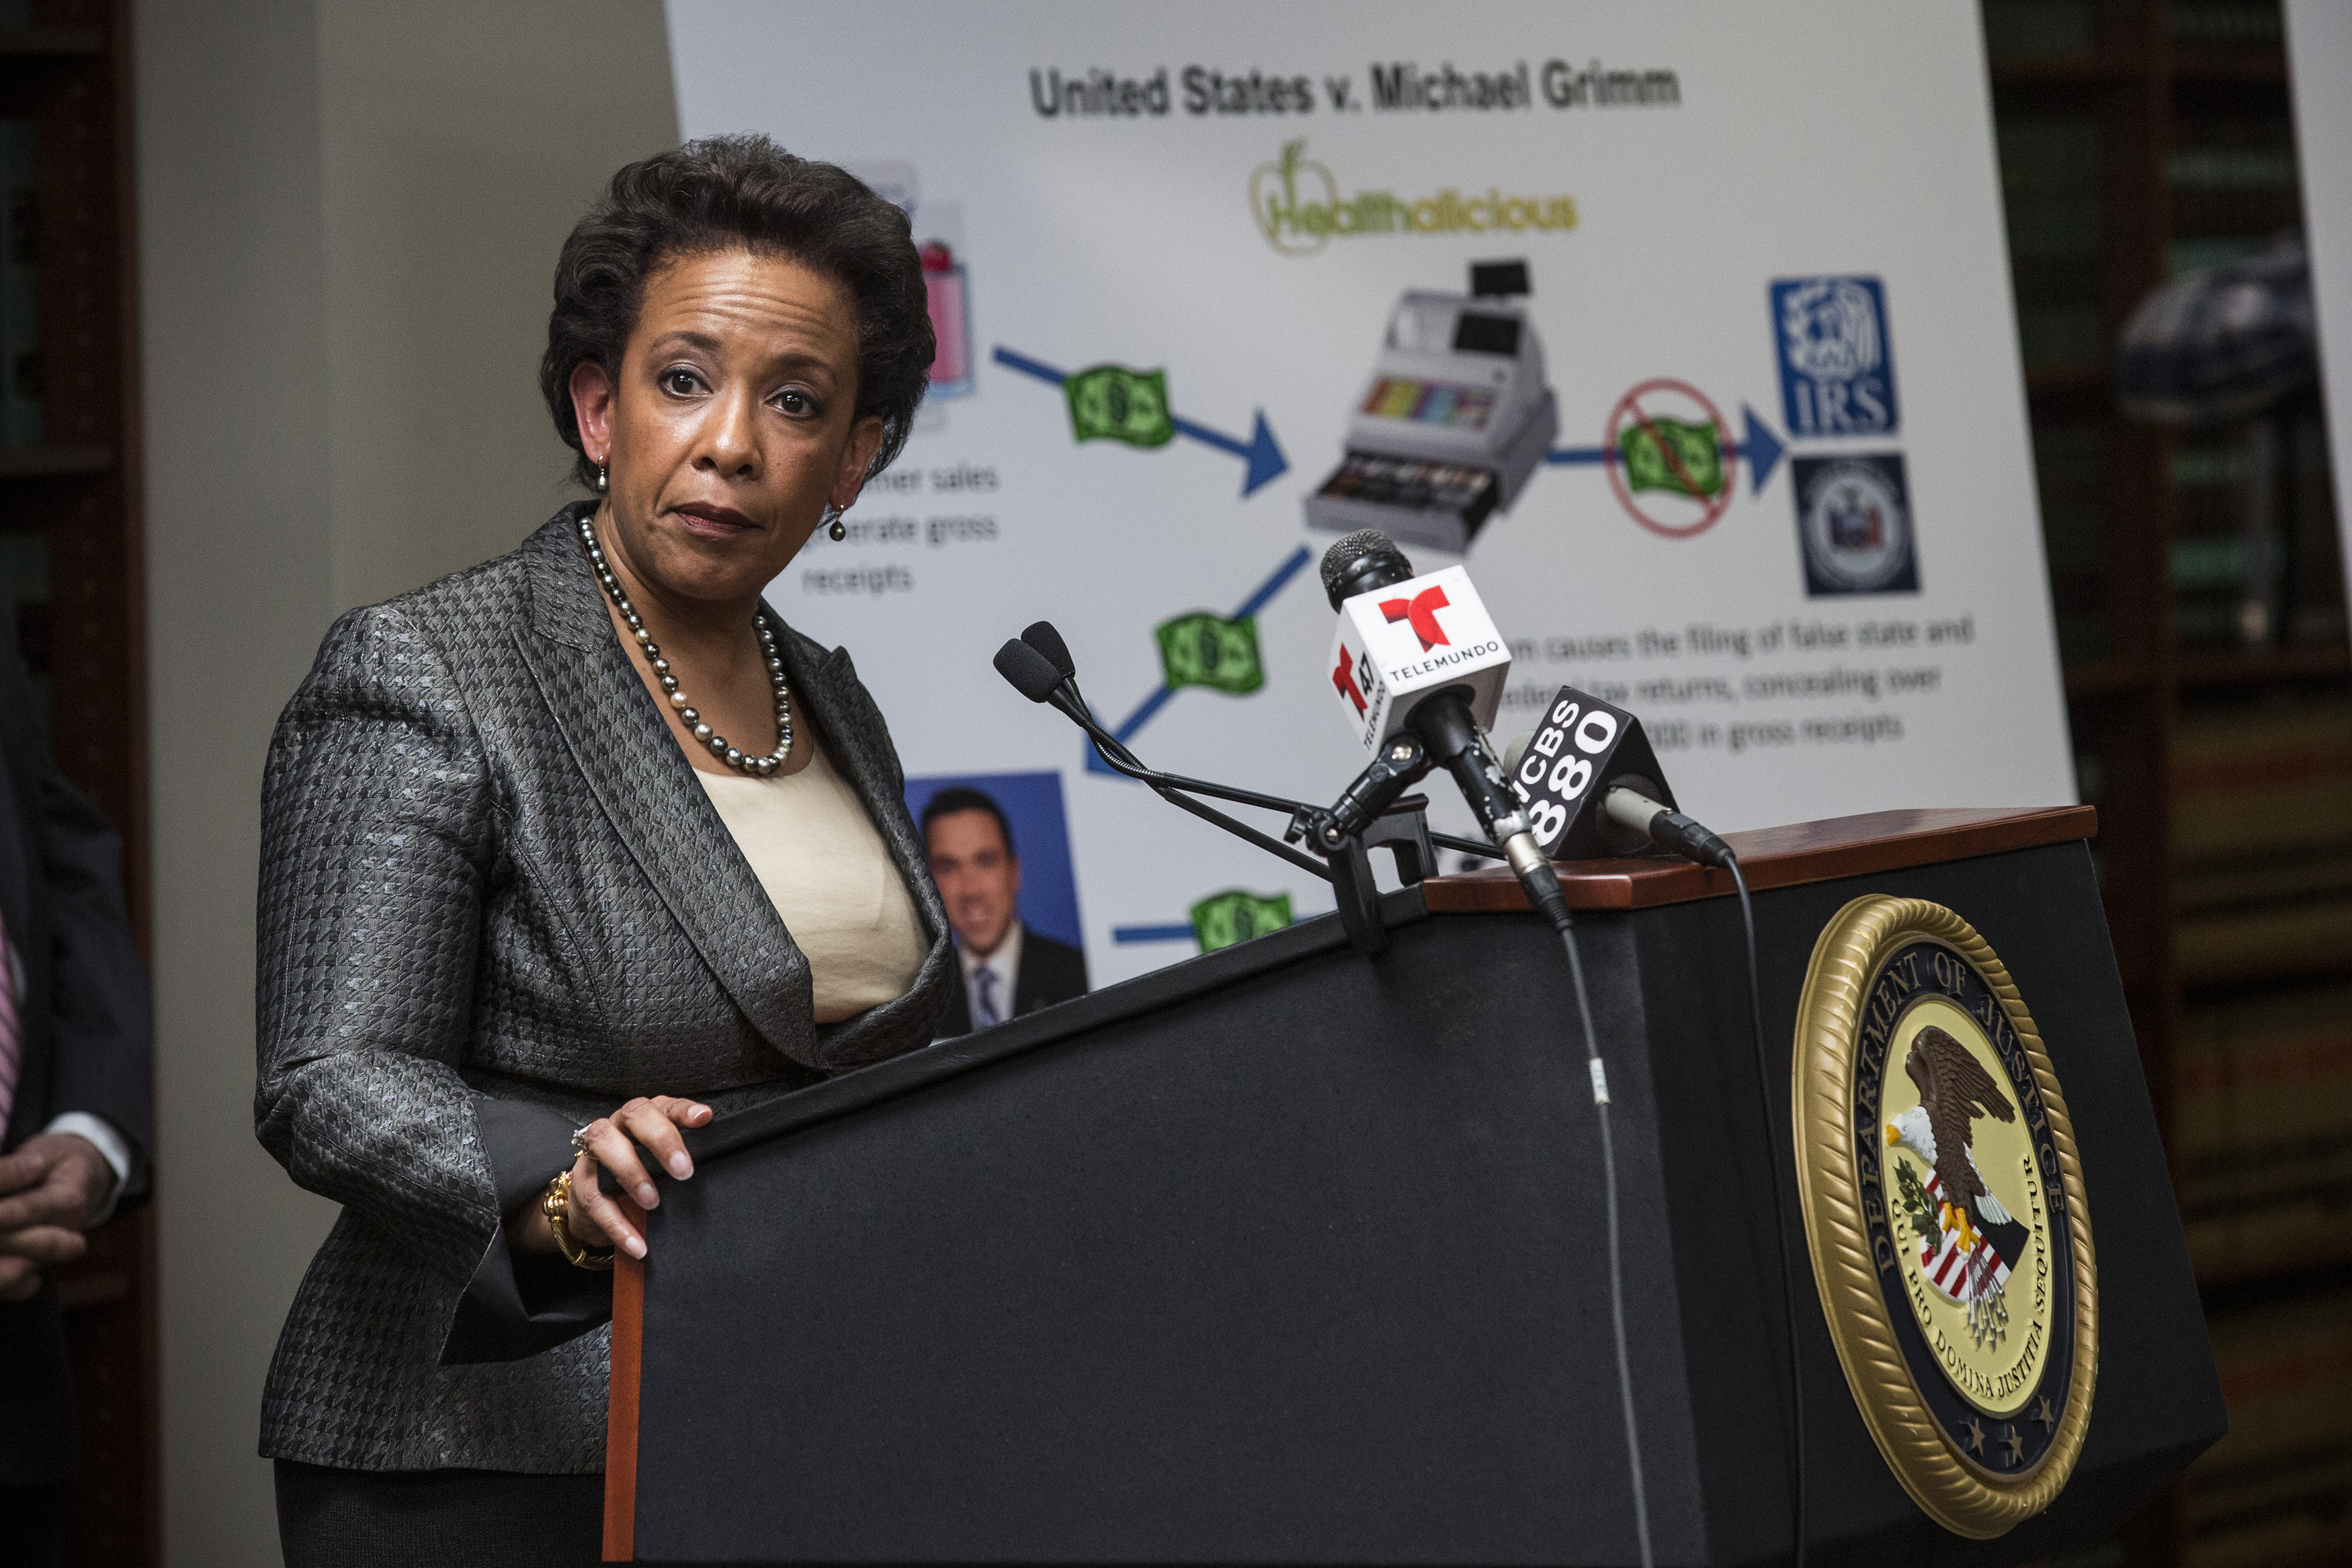 Loretta Lynch, the United States Attorney for the Eastern District of New York, speaking at a press conference. (Photo: Andrew Burton/Getty Images)